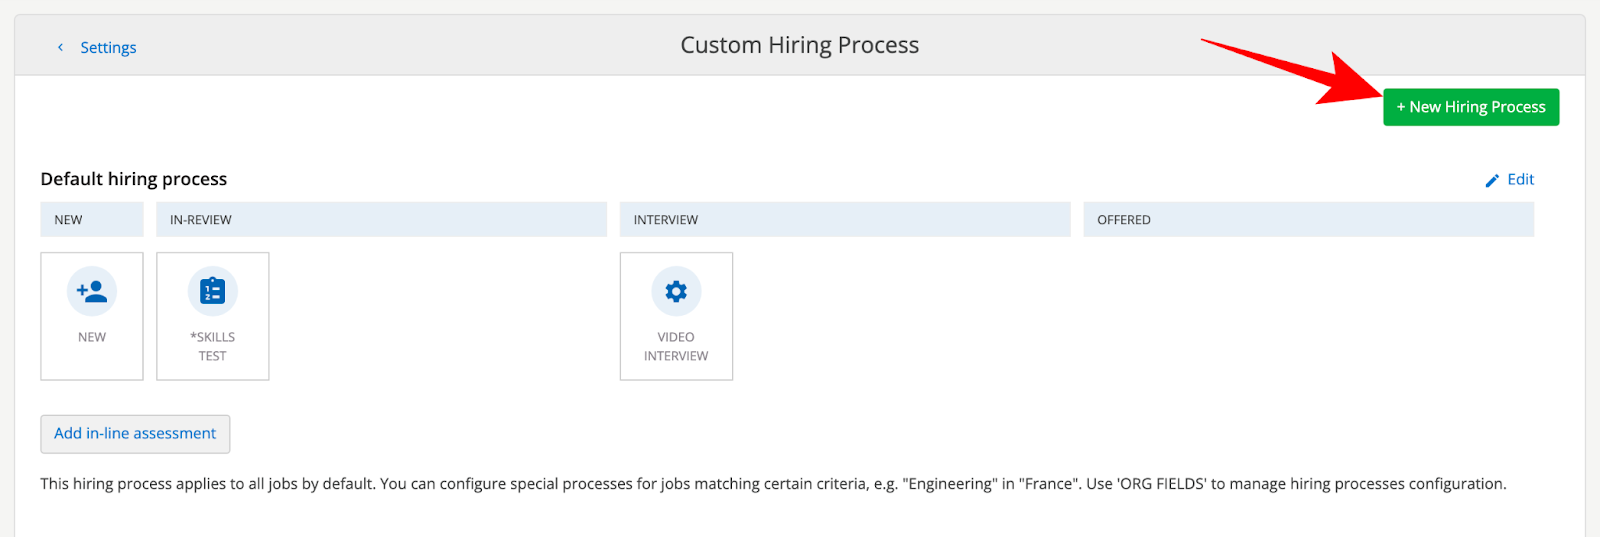 The custom hiring process screen with an arrow pointing towards "new hiring process" button.